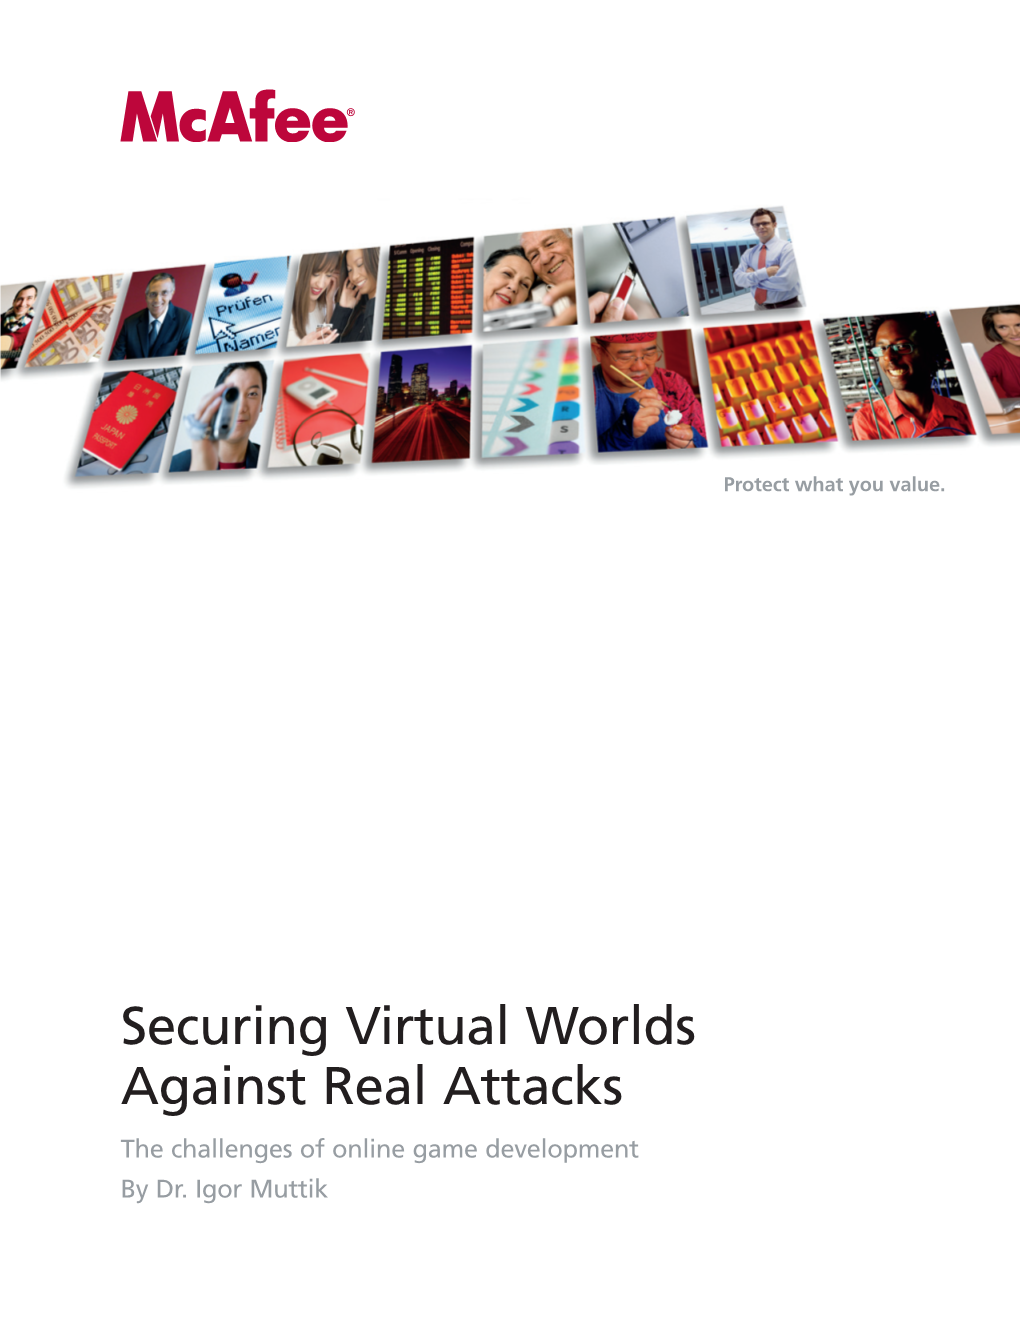 Securing Virtual Worlds Against Real Attacks the Challenges of Online Game Development by Dr